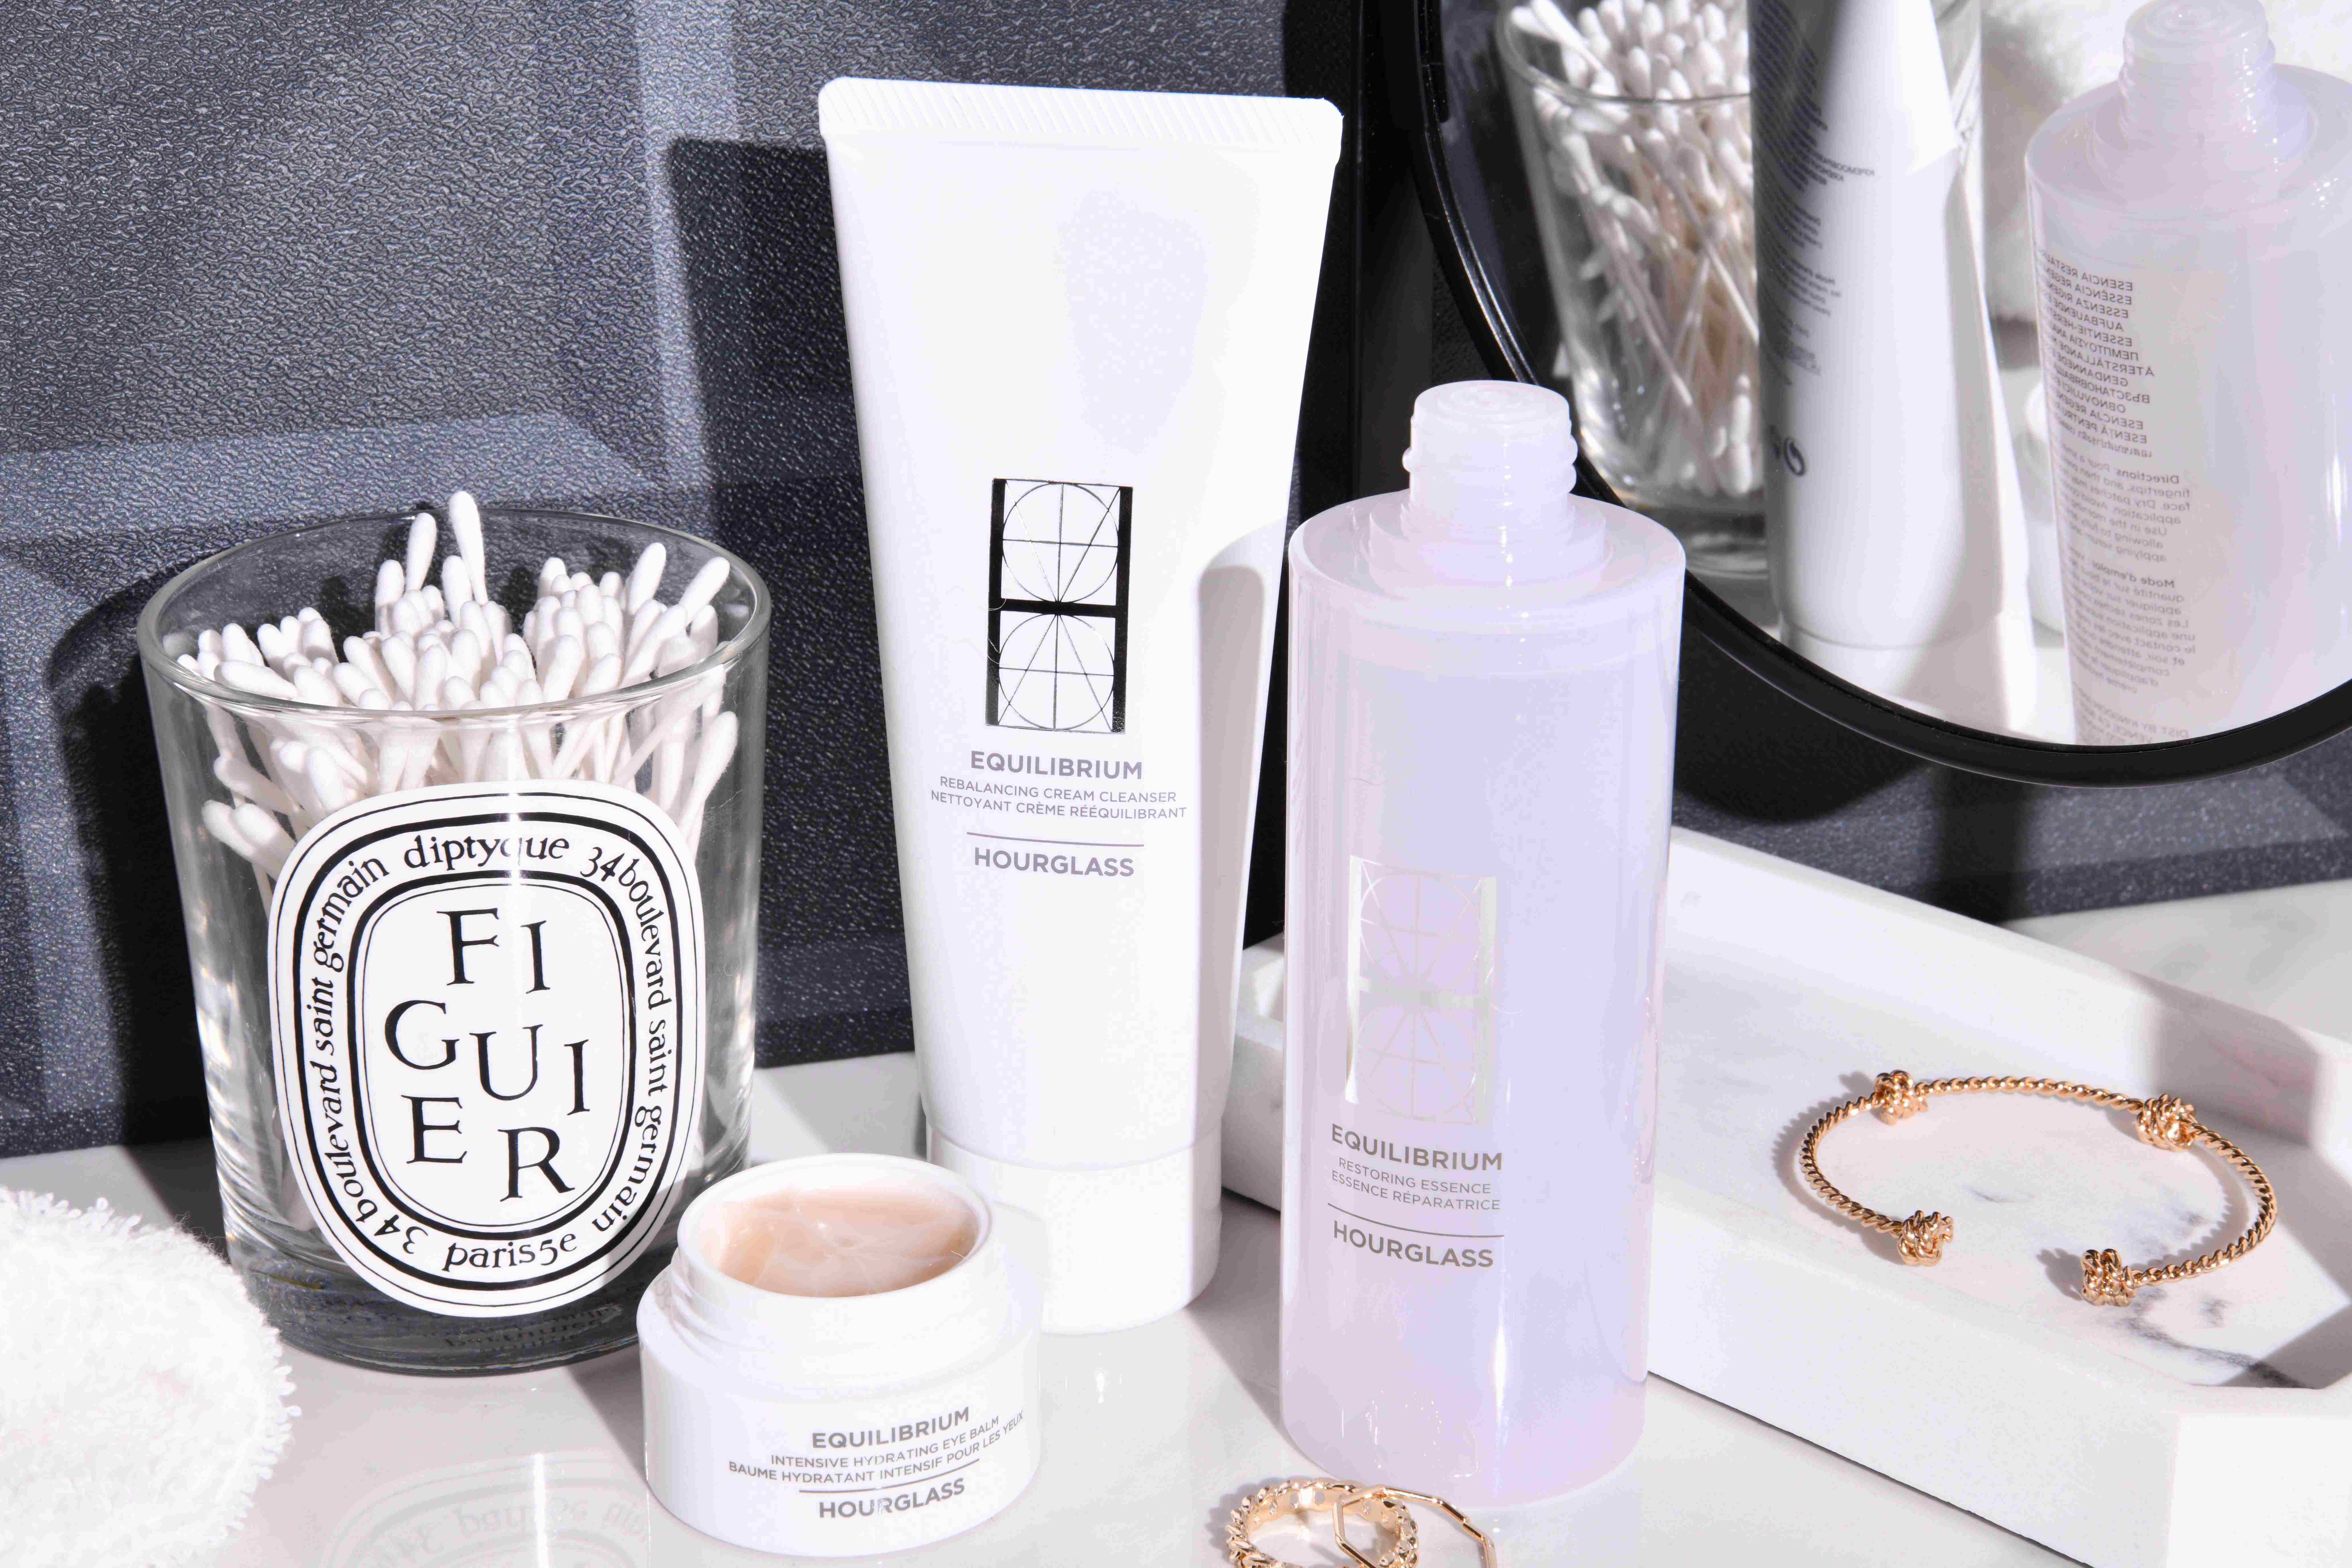 Hourglass Equilibrium Skincare Line Is Everything We Expected And More